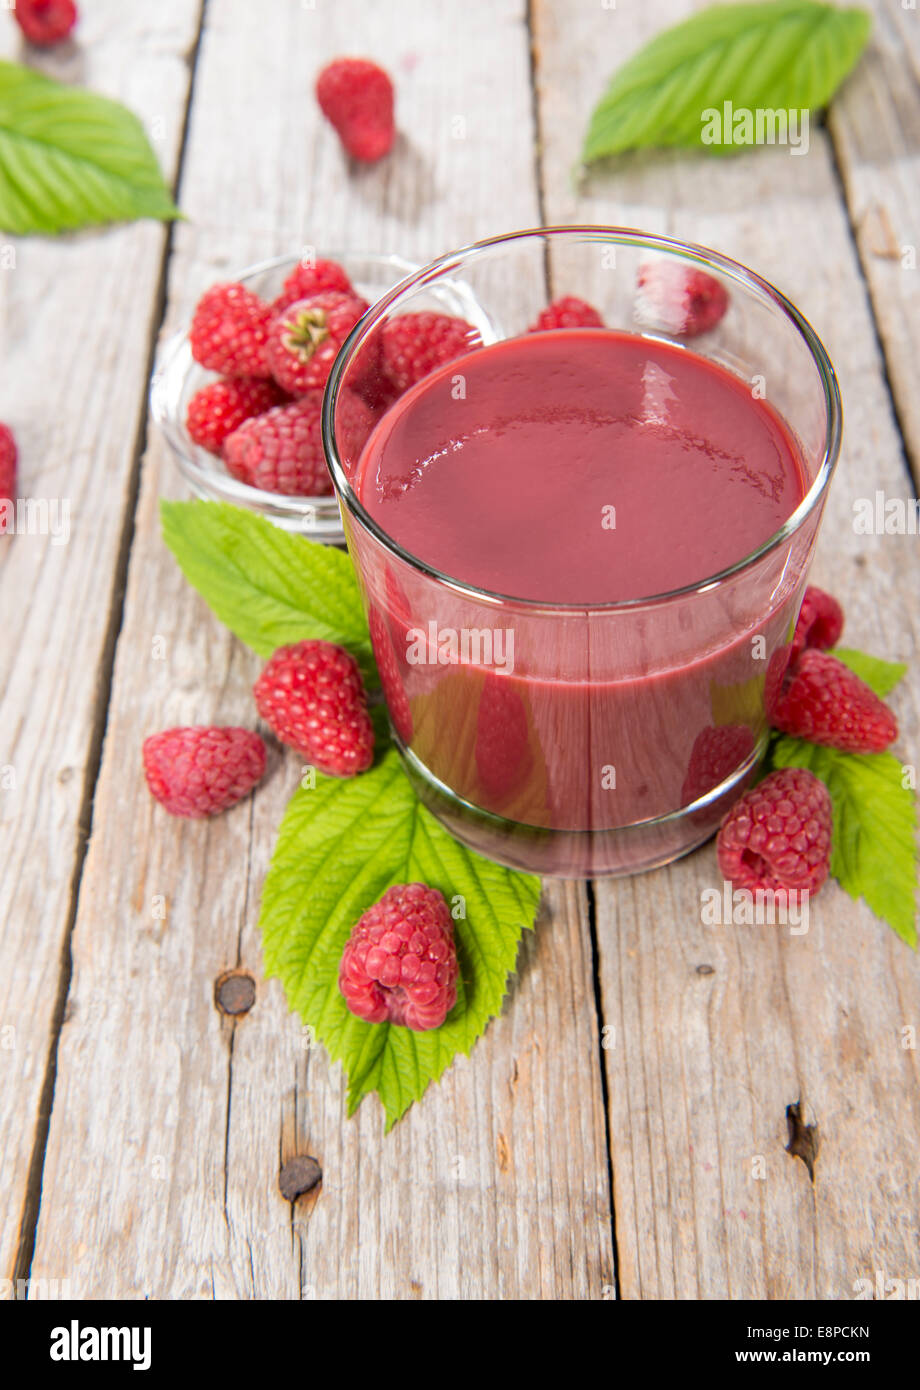 Portion of fresh made Raspberry Juice with some fruits Stock Photo